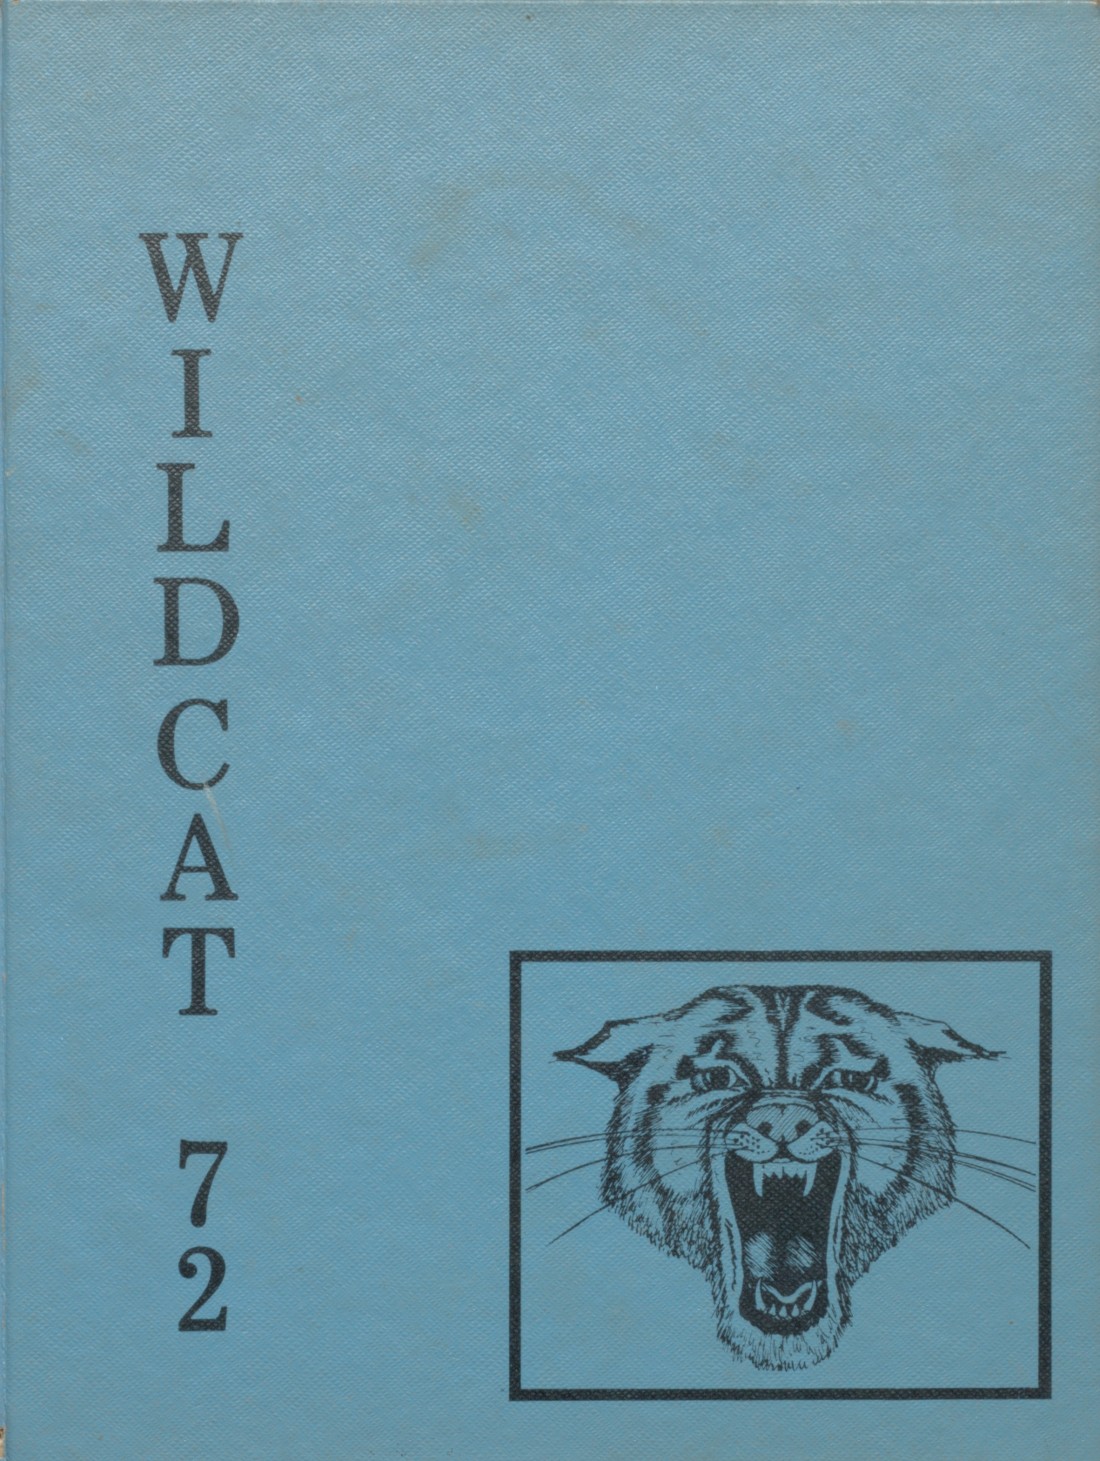 1972 yearbook from Umpire High School from Umpire, Arkansas